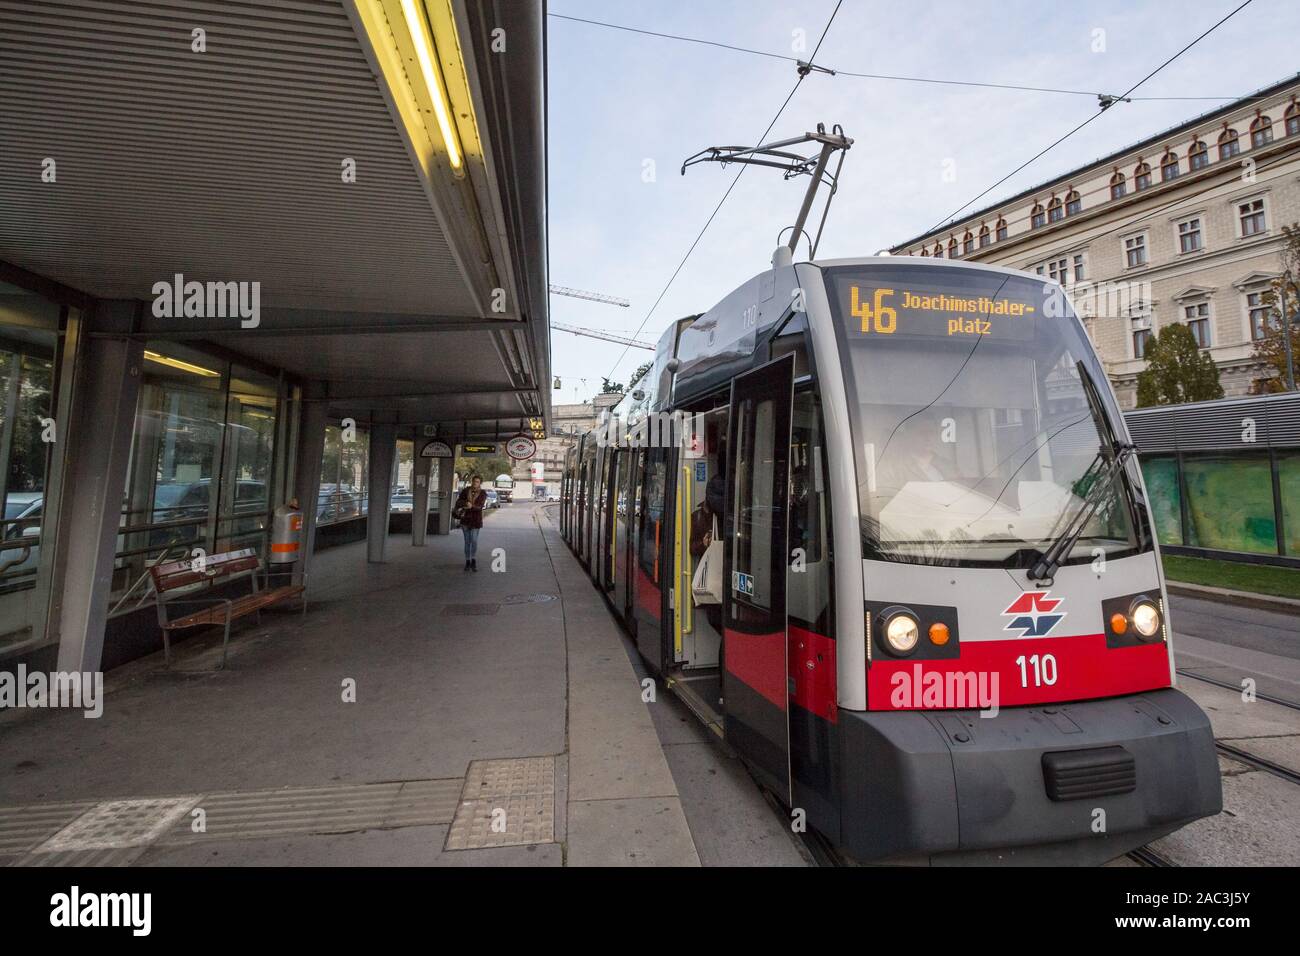 VIENNA, AUSTRIA - NOVEMBER 6, 2019: Vienna tram, also called strassenbahn, the most recent model. passing by on the iconic ringstrasse in the city cen Stock Photo